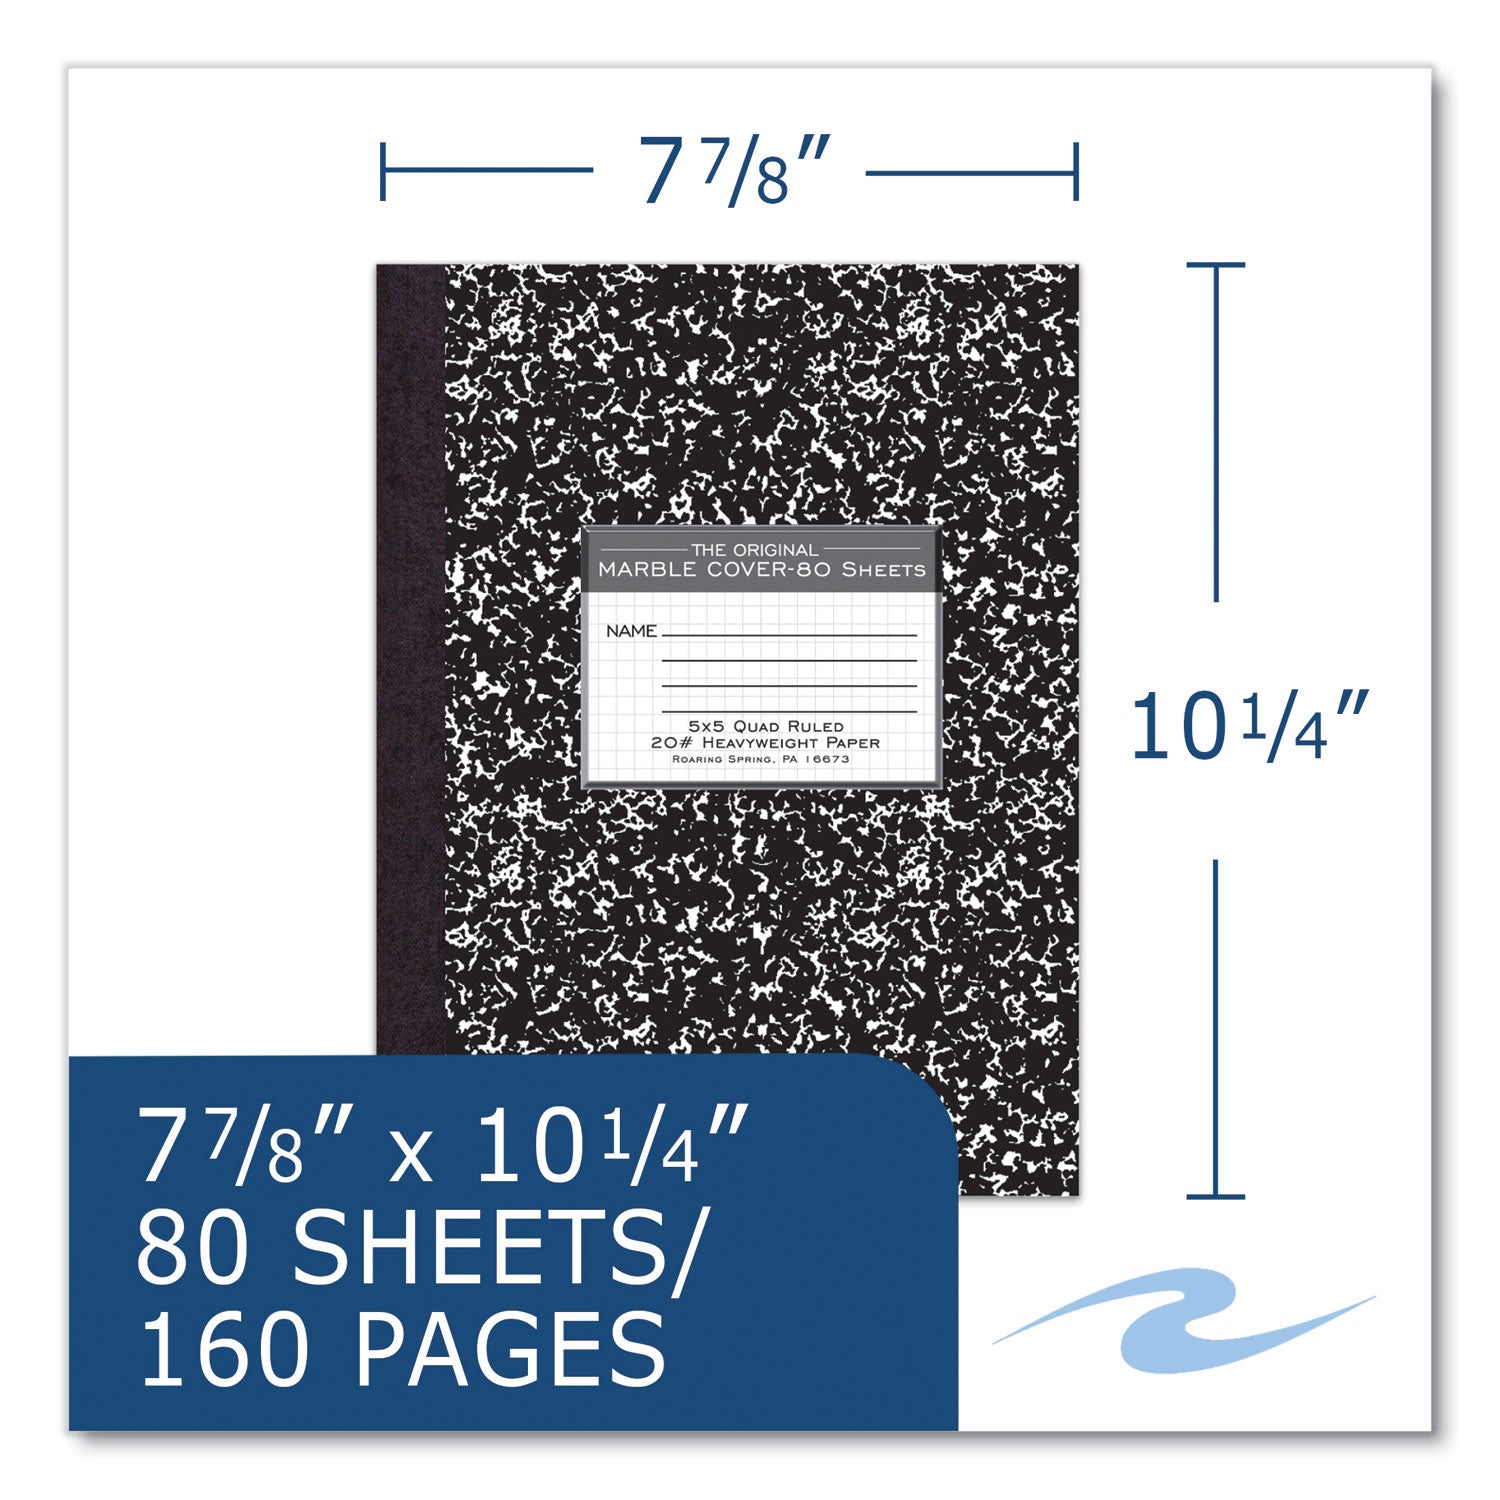 hardcover-composition-book-quadrille-5-sq-in-rule-black-marble-cover-80-1025-x-788-sheet-24-ct-ships-in-4-6-bus-days_roa77475cs - 3